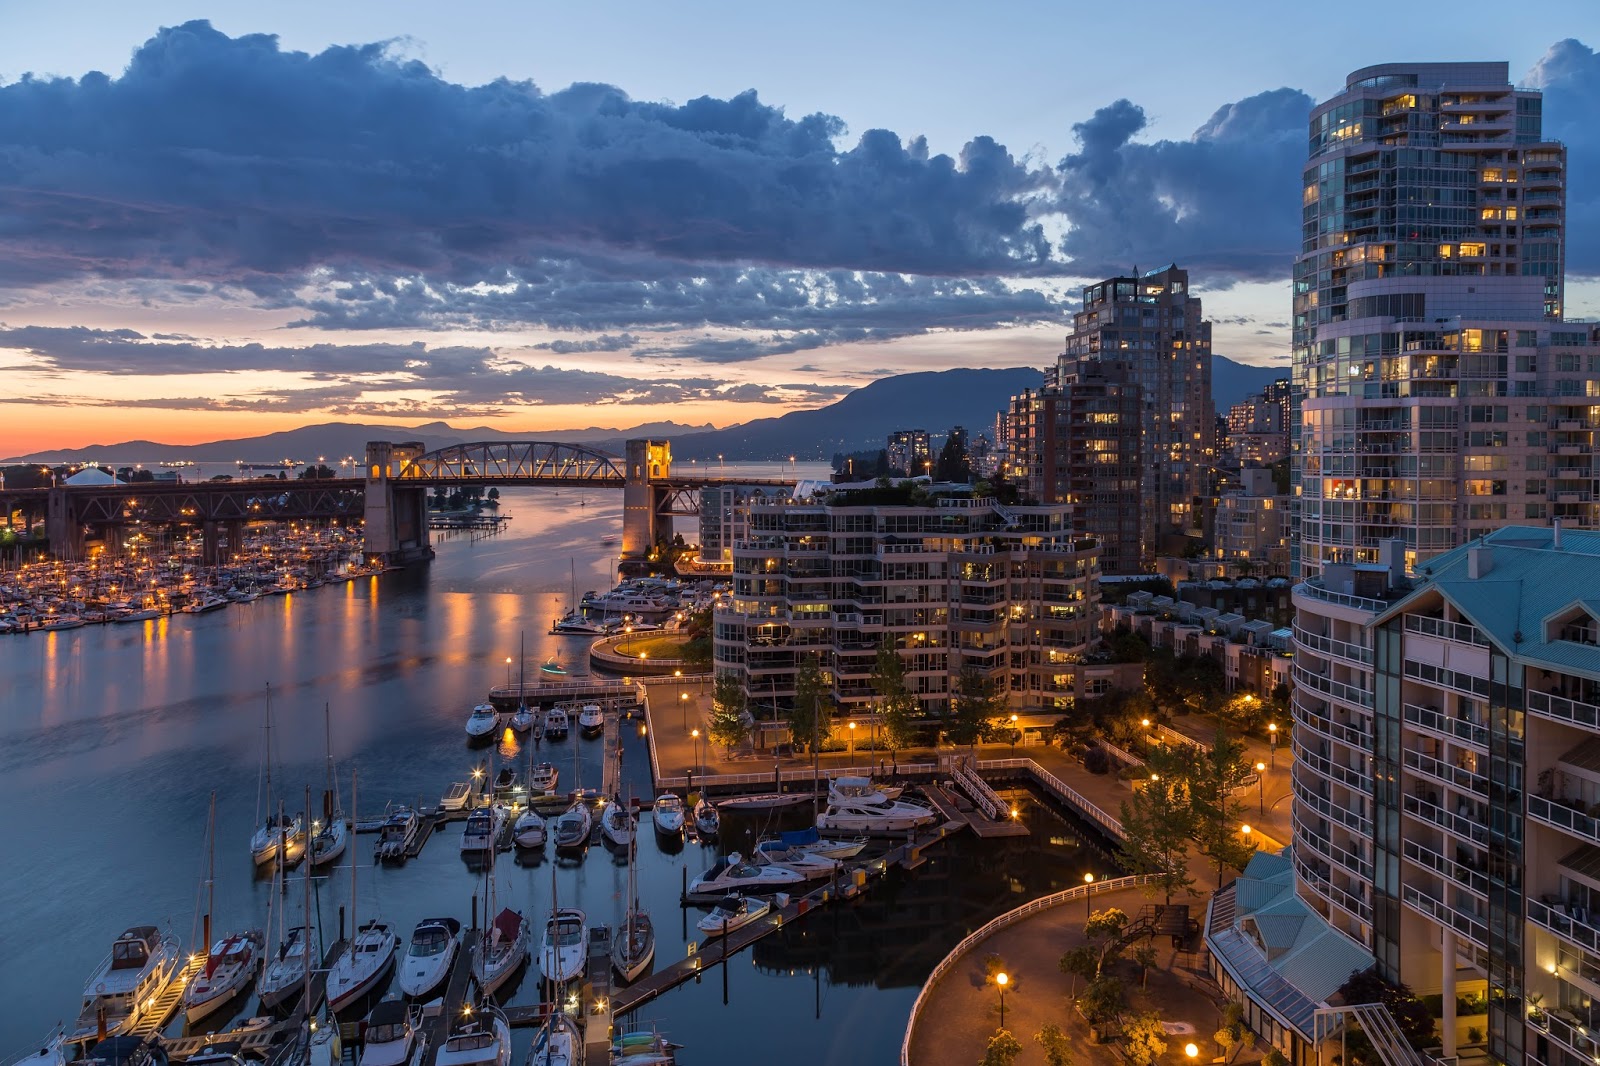 Travel & Adventures: Vancouver. A voyage to Vancouver, British Columbia ...